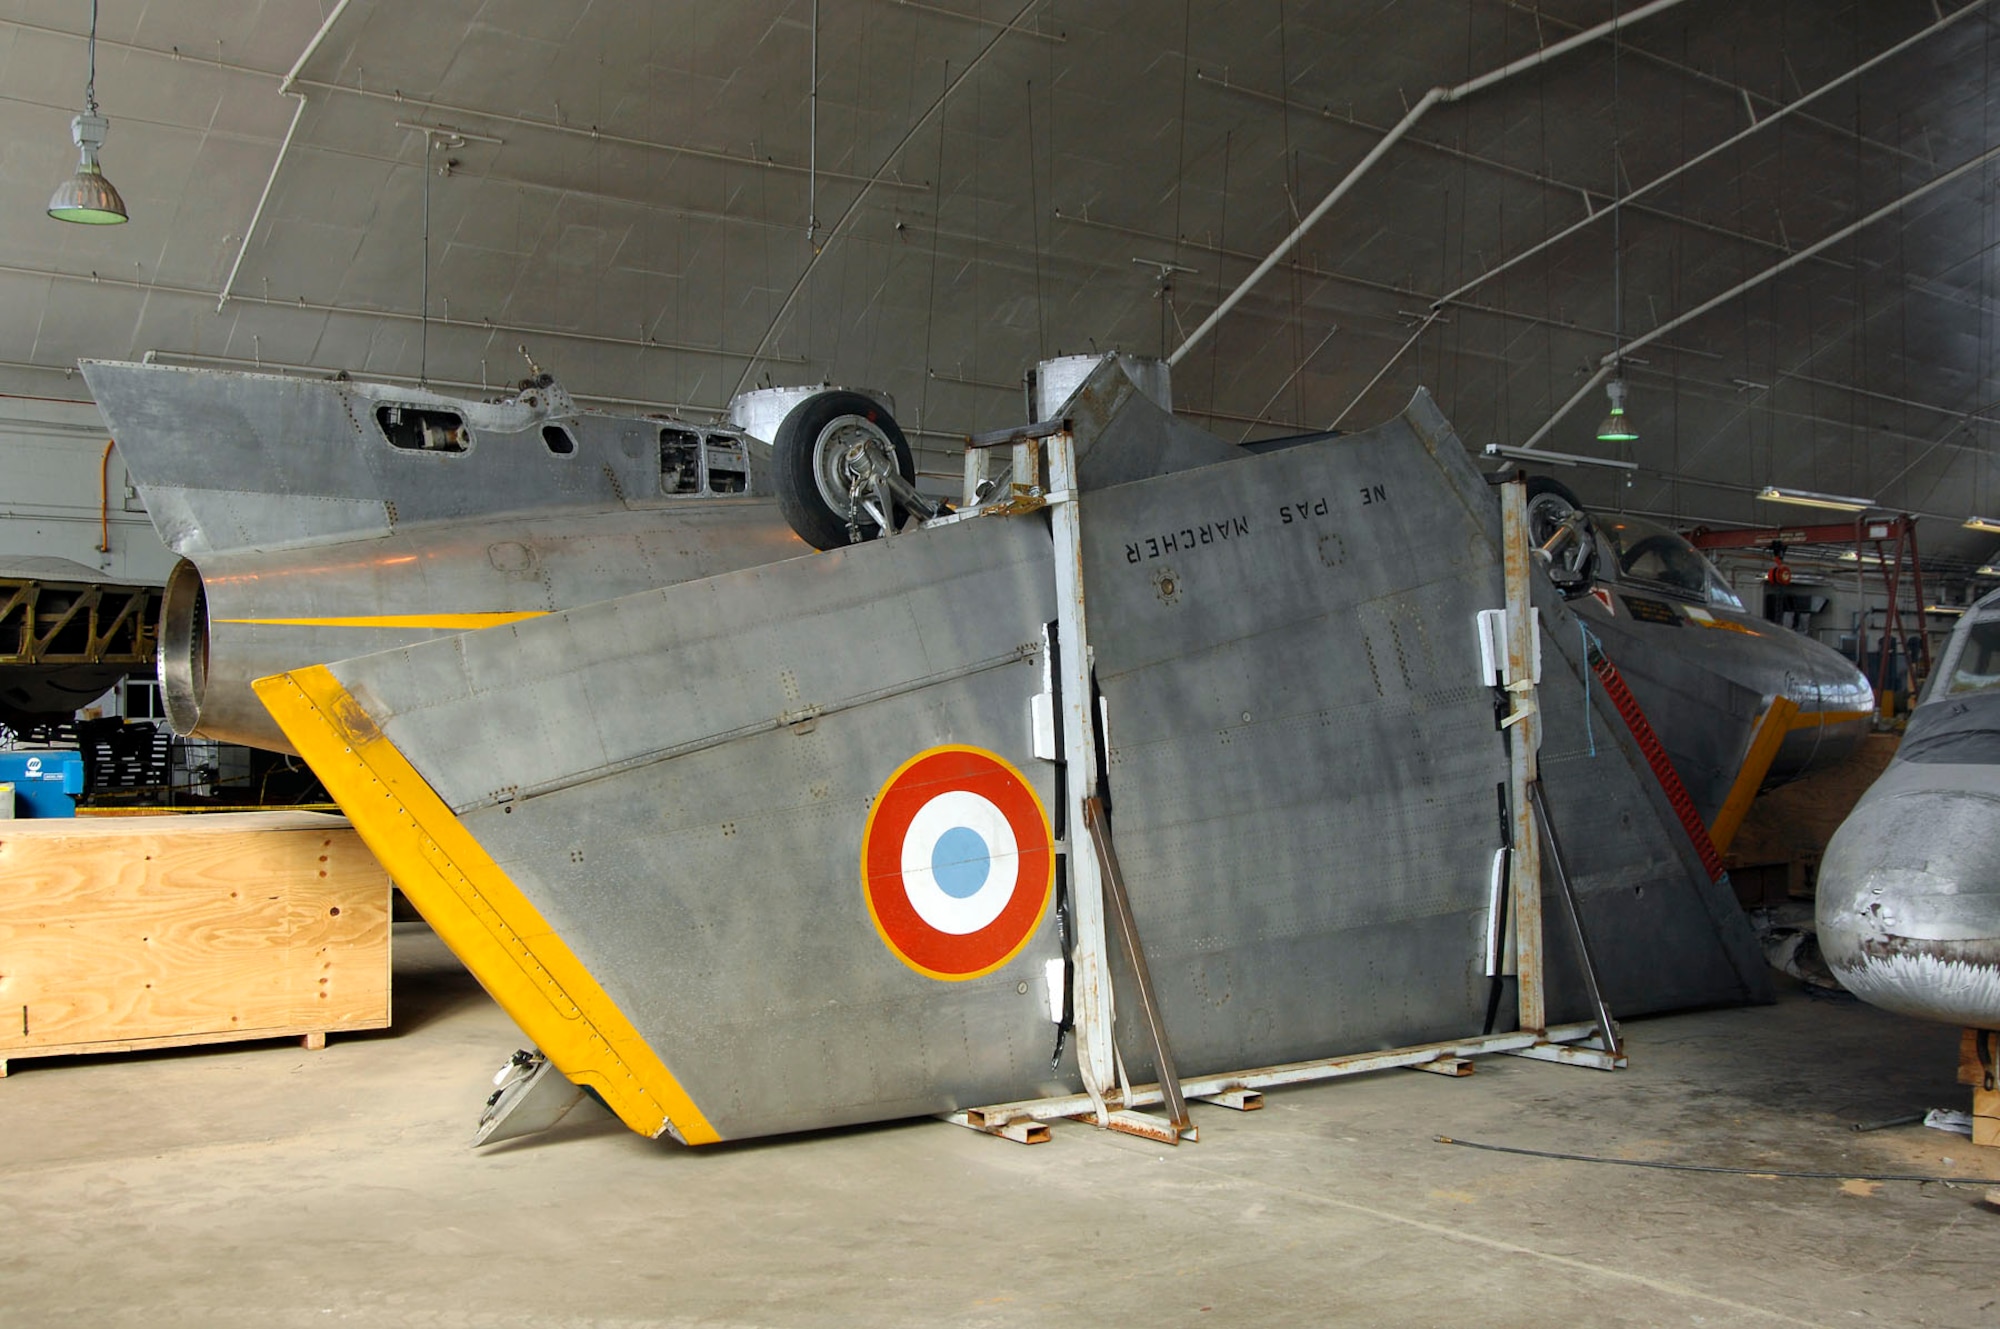 DAYTON, Ohio (02/2007) -- Mystere IVA aircraft wings in the restoration hangar at the National Museum of the U.S. Air Force. (U.S. Air Force photo)